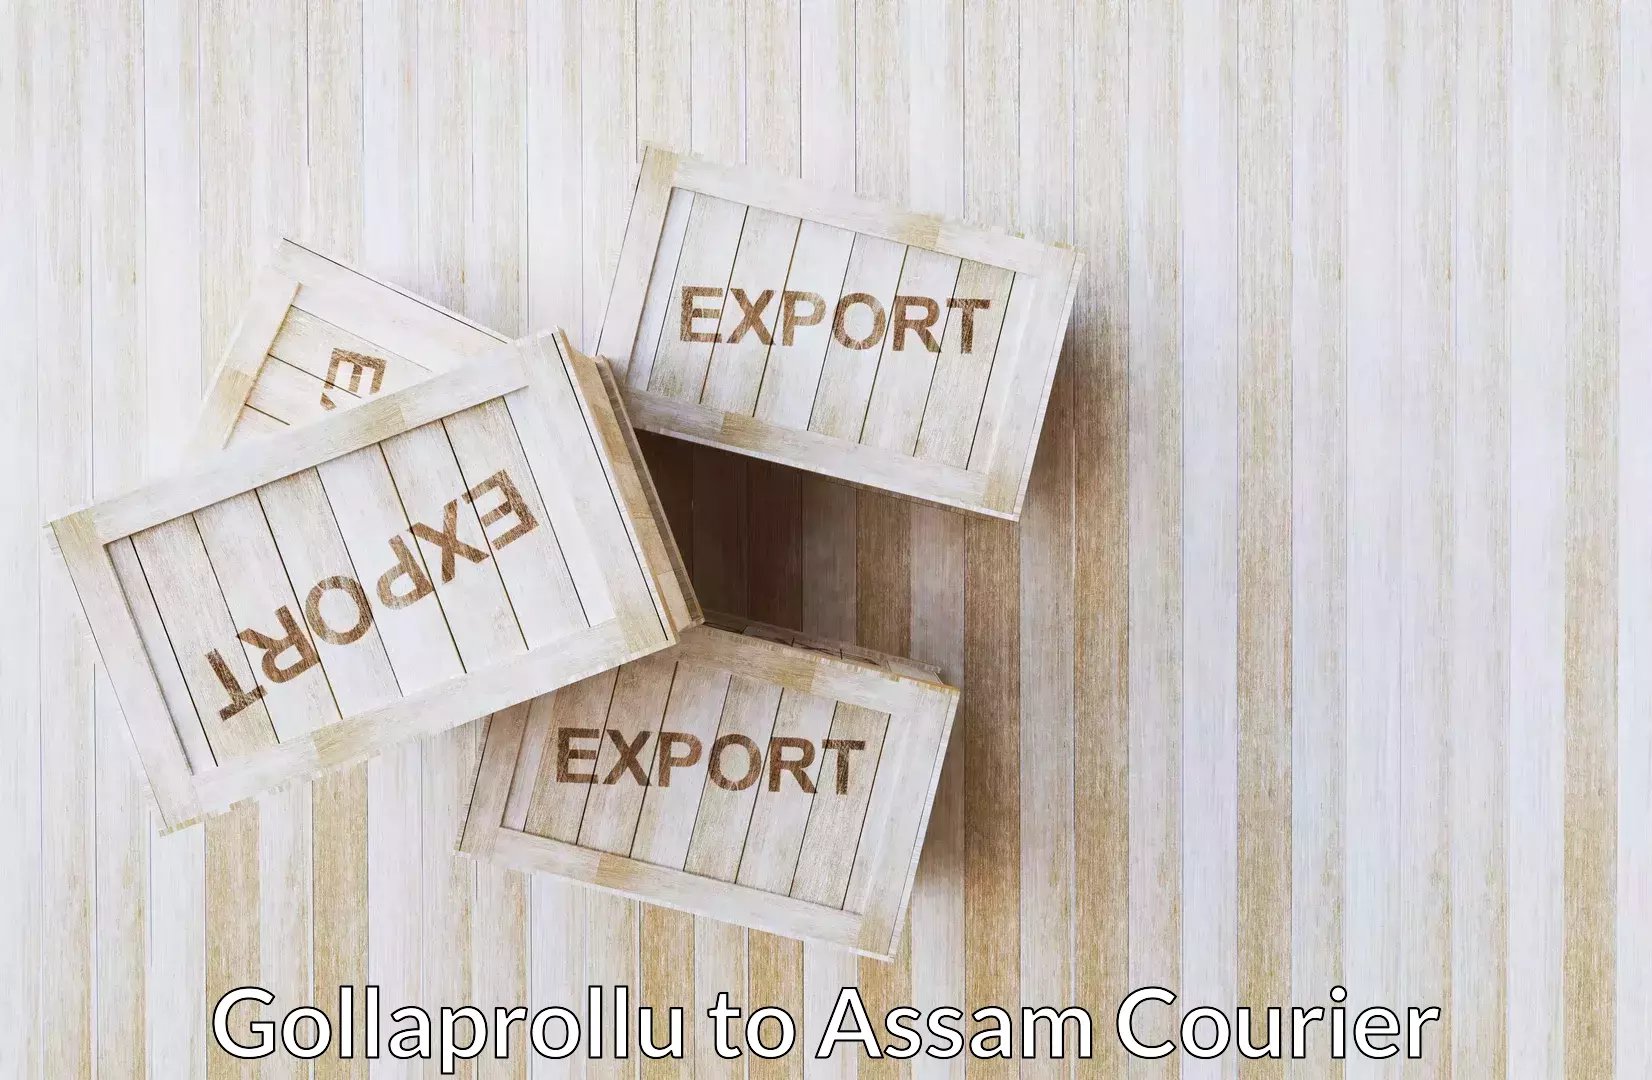 Efficient relocation services Gollaprollu to Assam